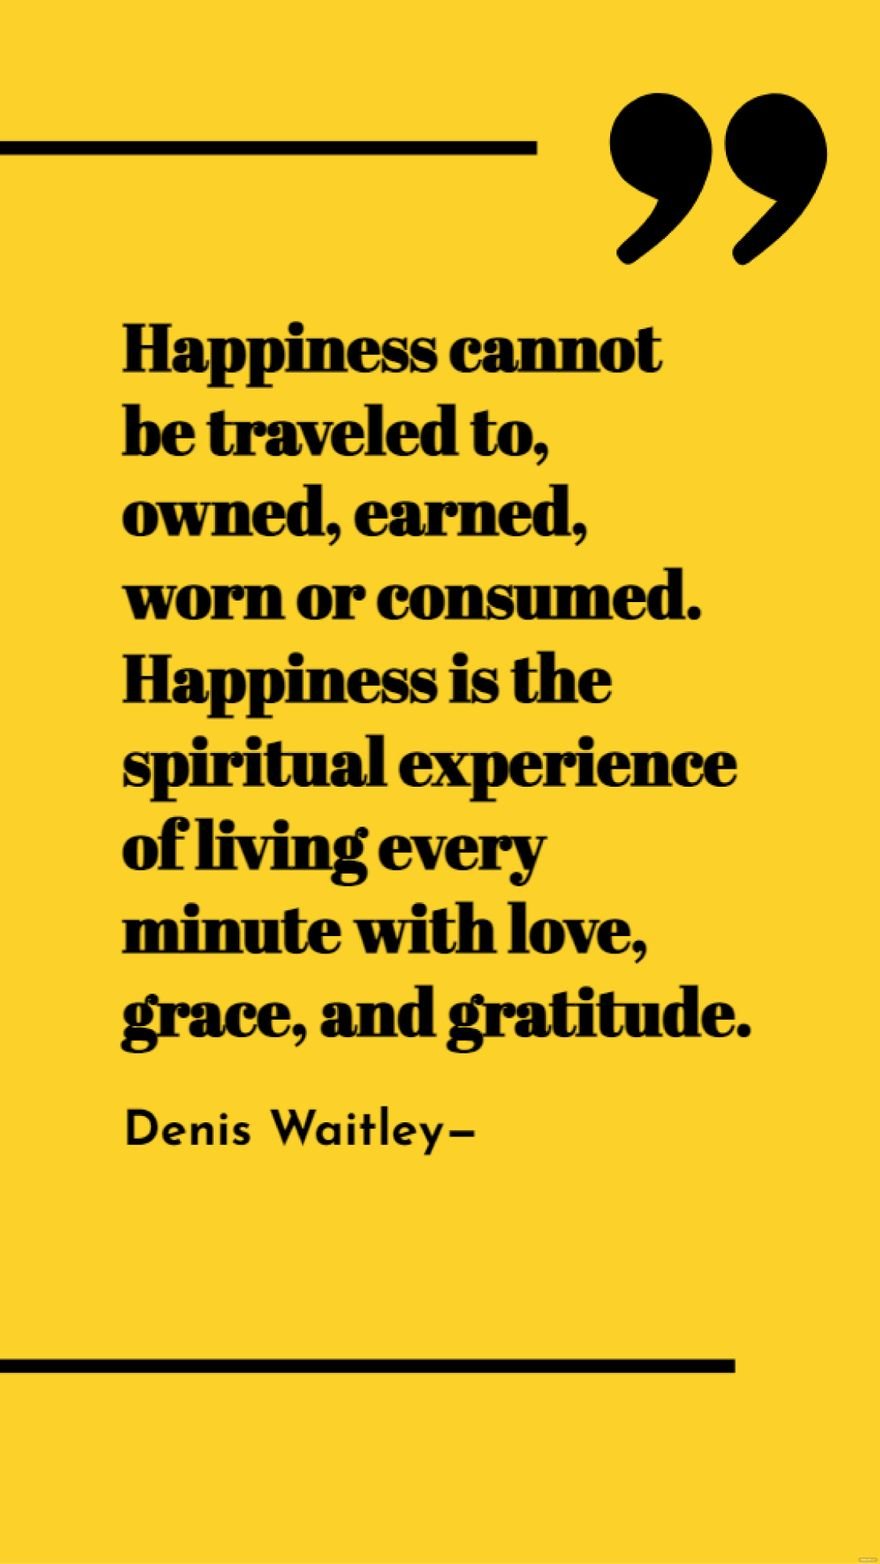 Denis Waitley - Happiness cannot be traveled to, owned, earned, worn or consumed. Happiness is the spiritual experience of living every minute with love, grace, and gratitude.